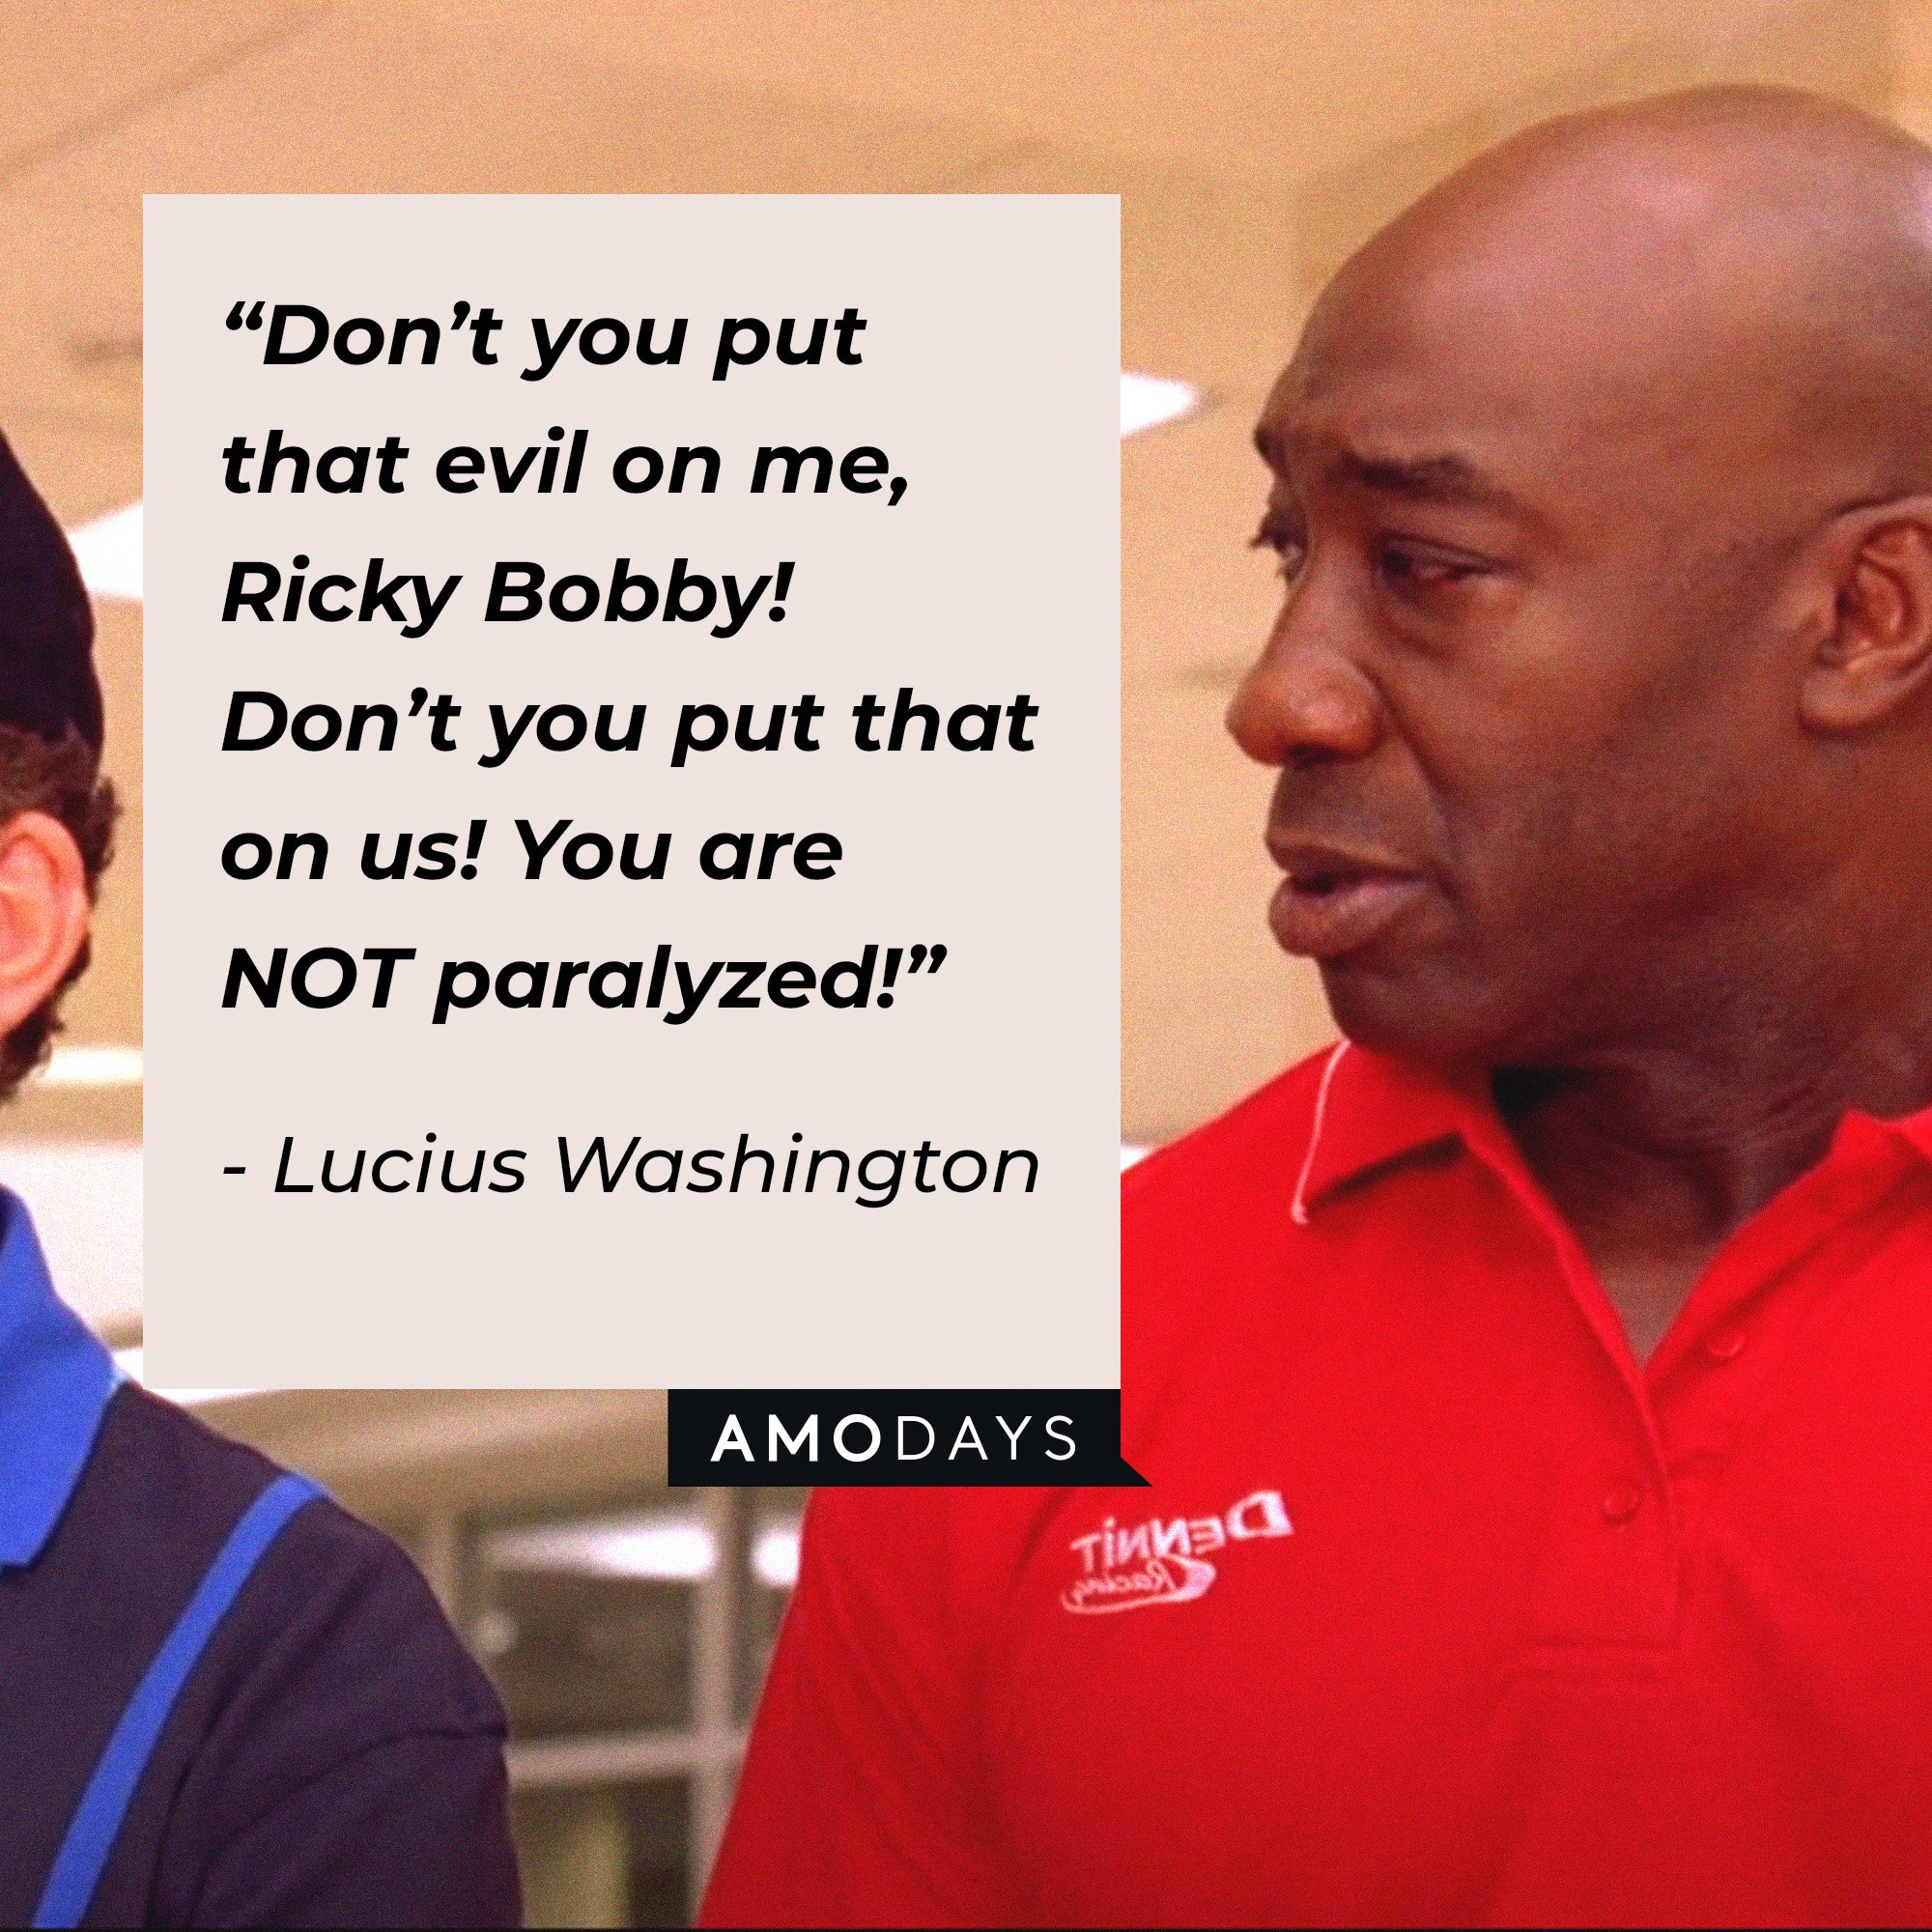 Lucius Washington’s quote: “Don’t you put that evil on me, Ricky Bobby! Don’t you put that on us! You are NOT paralyzed!” | Image: AmoDays